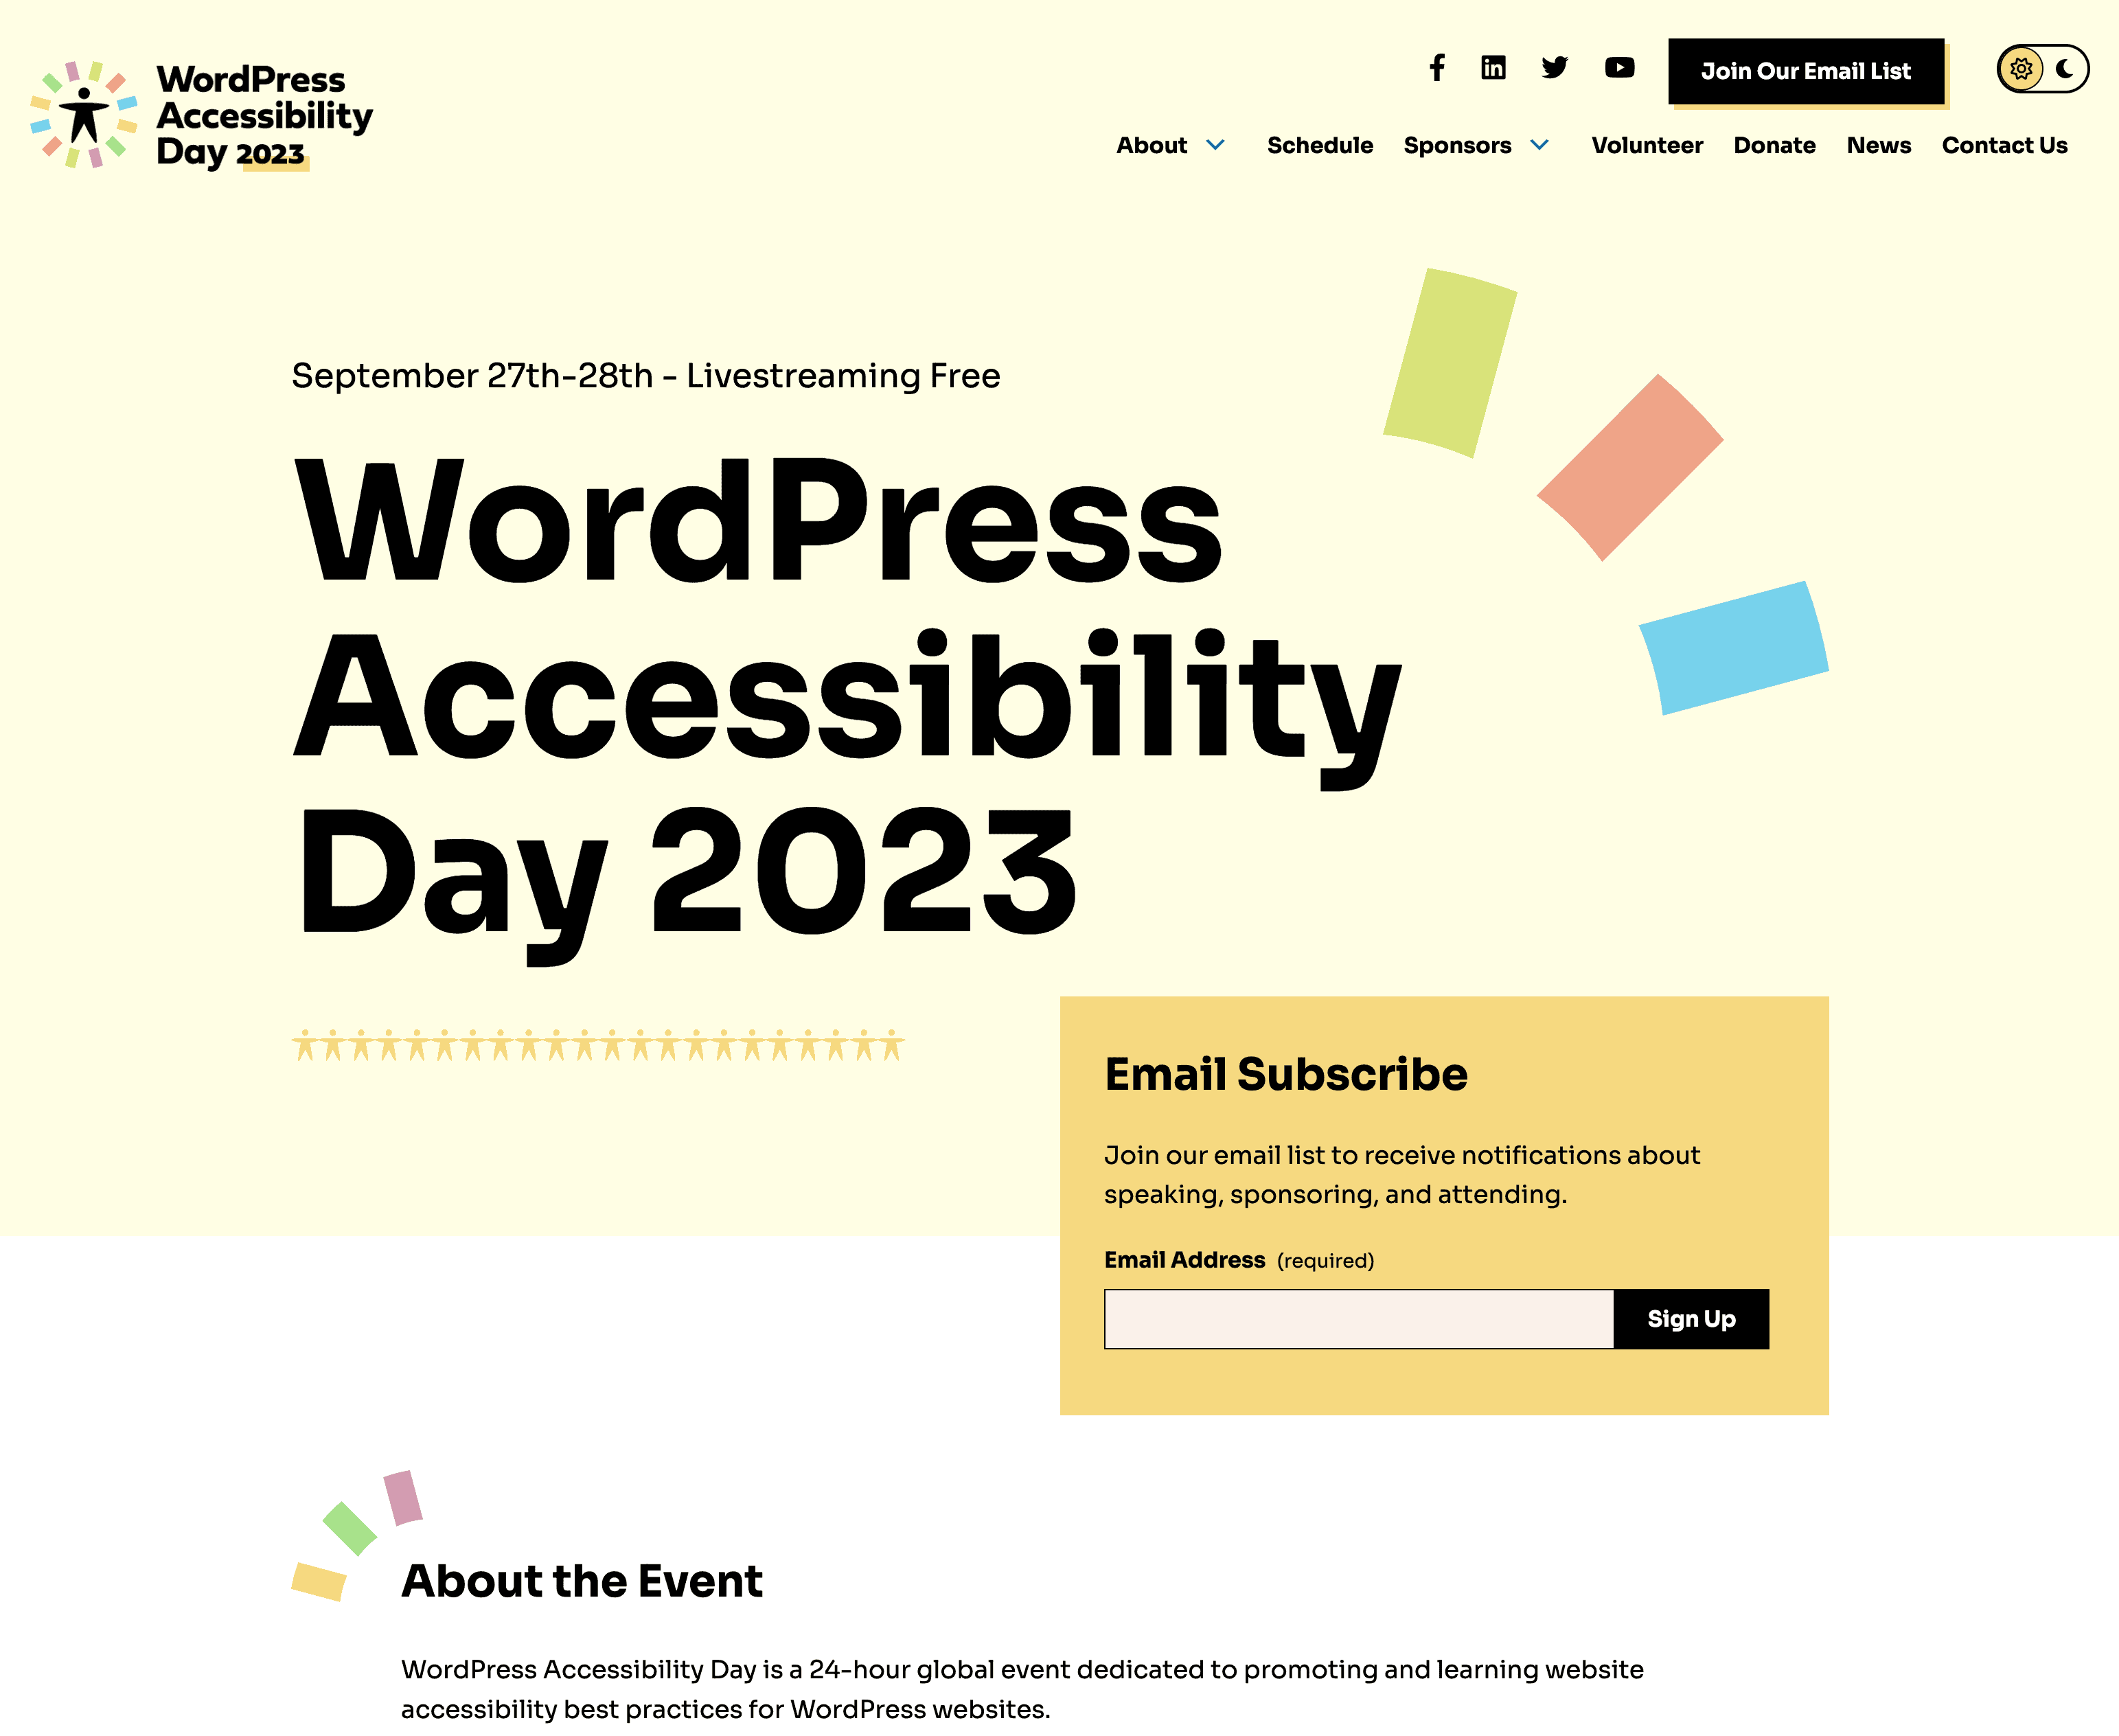 The WordPress Accessibility Day 2023 home page showing very light yellow, green, pink, and blue design accents and black text.